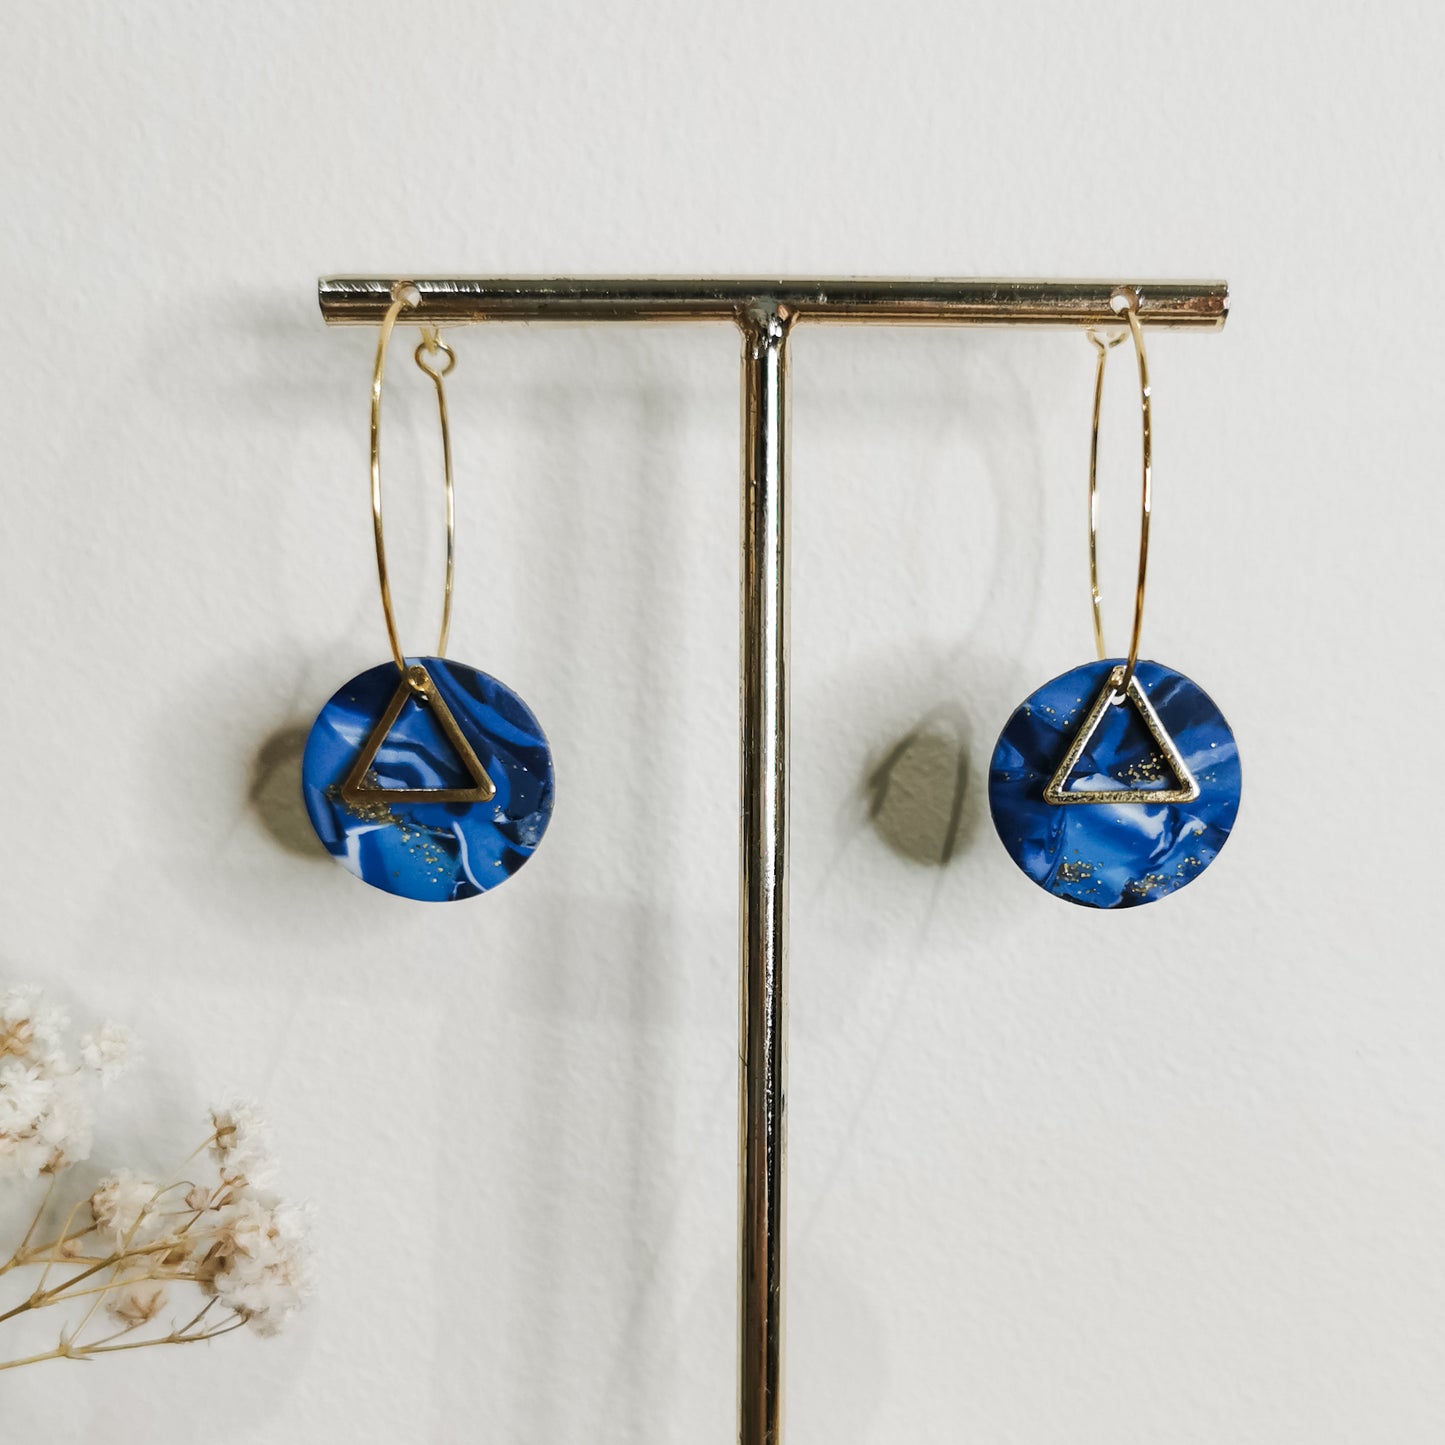 HIGAN ONEN | round drop with triangle detail 30mm hoop earrings in mussel shell blue marble